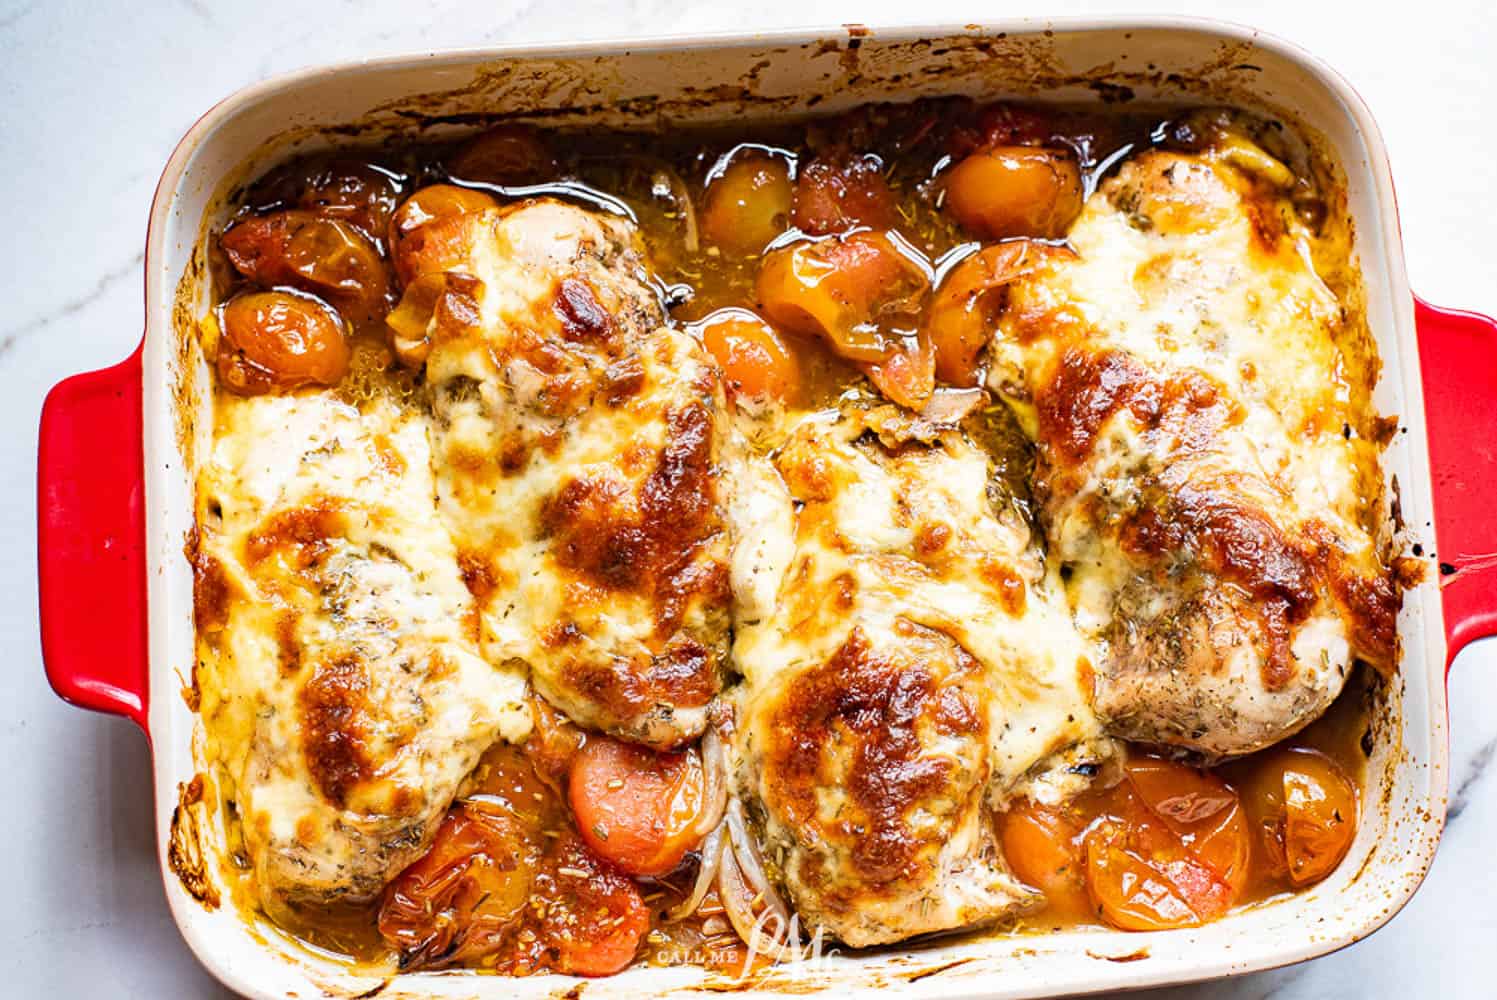 Chicken covered with cheese in a casserole dish with roasted tomatoes.